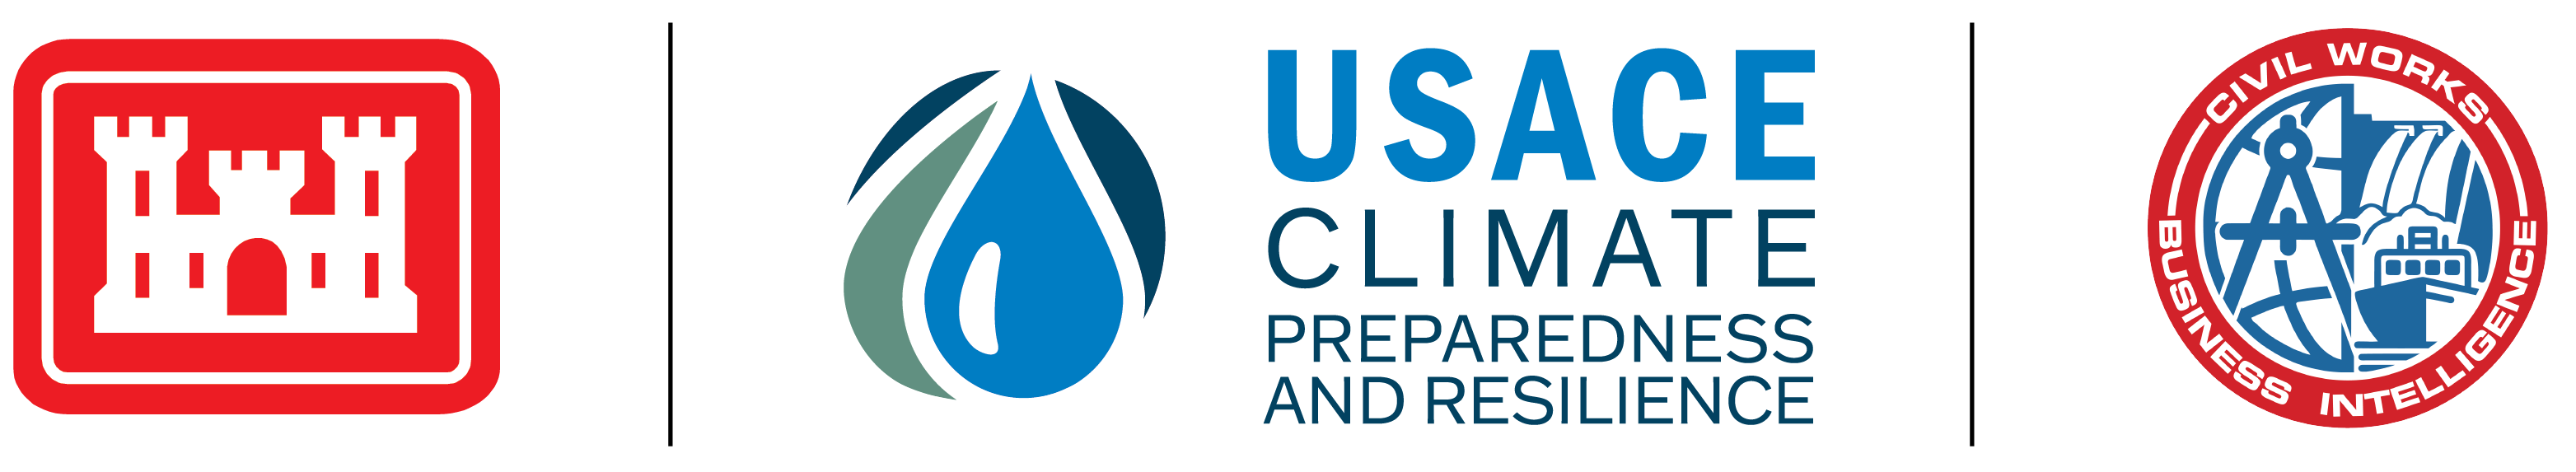 United States Army Corps of Engineers (USACE), Climate Preparedness and Resilience (CPR), and Civil Works Business Intelligence (CWBI) logos